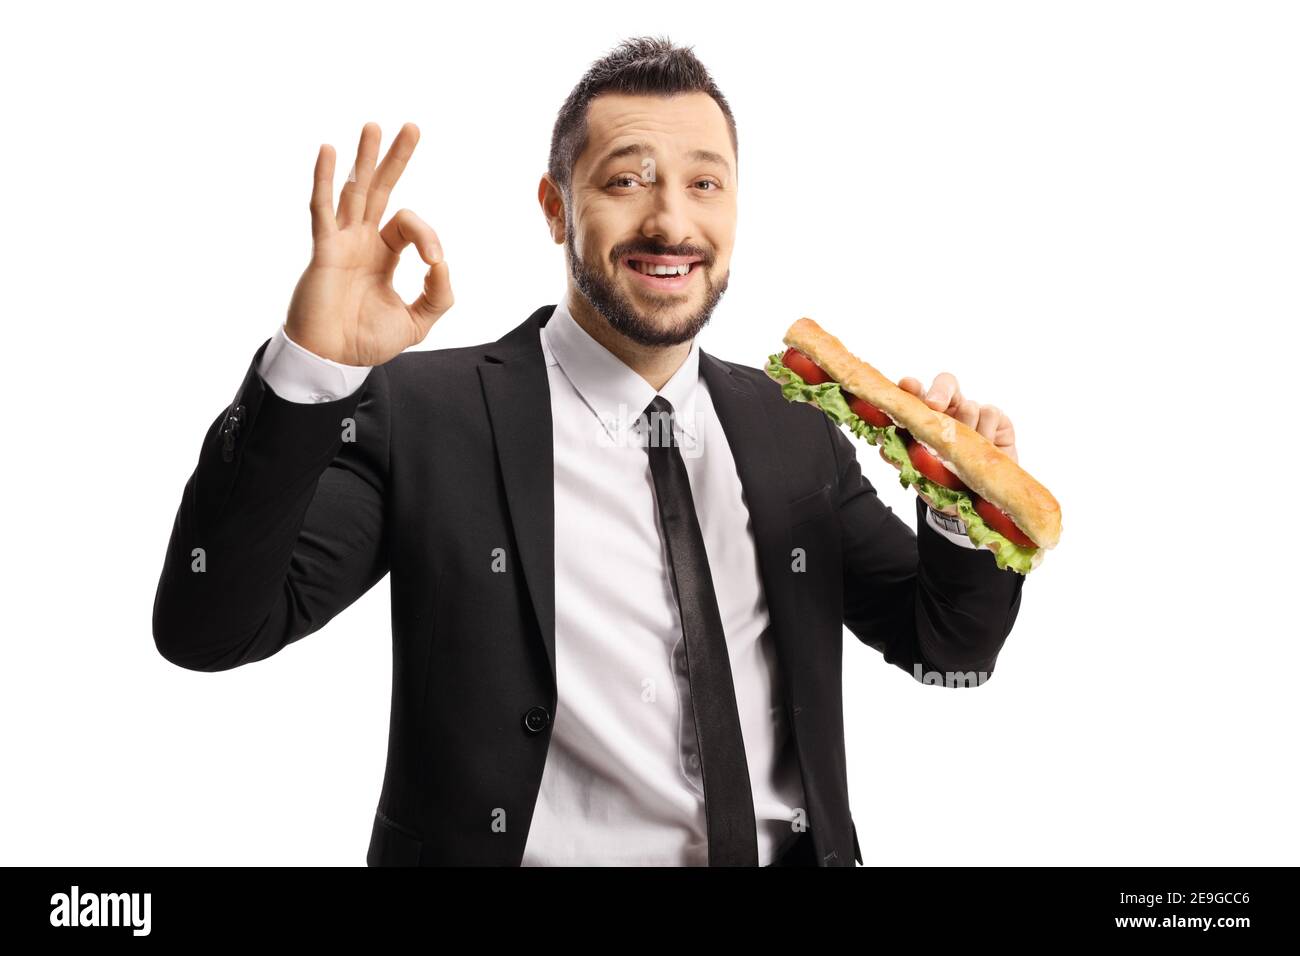 Businessman holding a sandwich in a baguette and gesturing ok sign isolated on white background Stock Photo